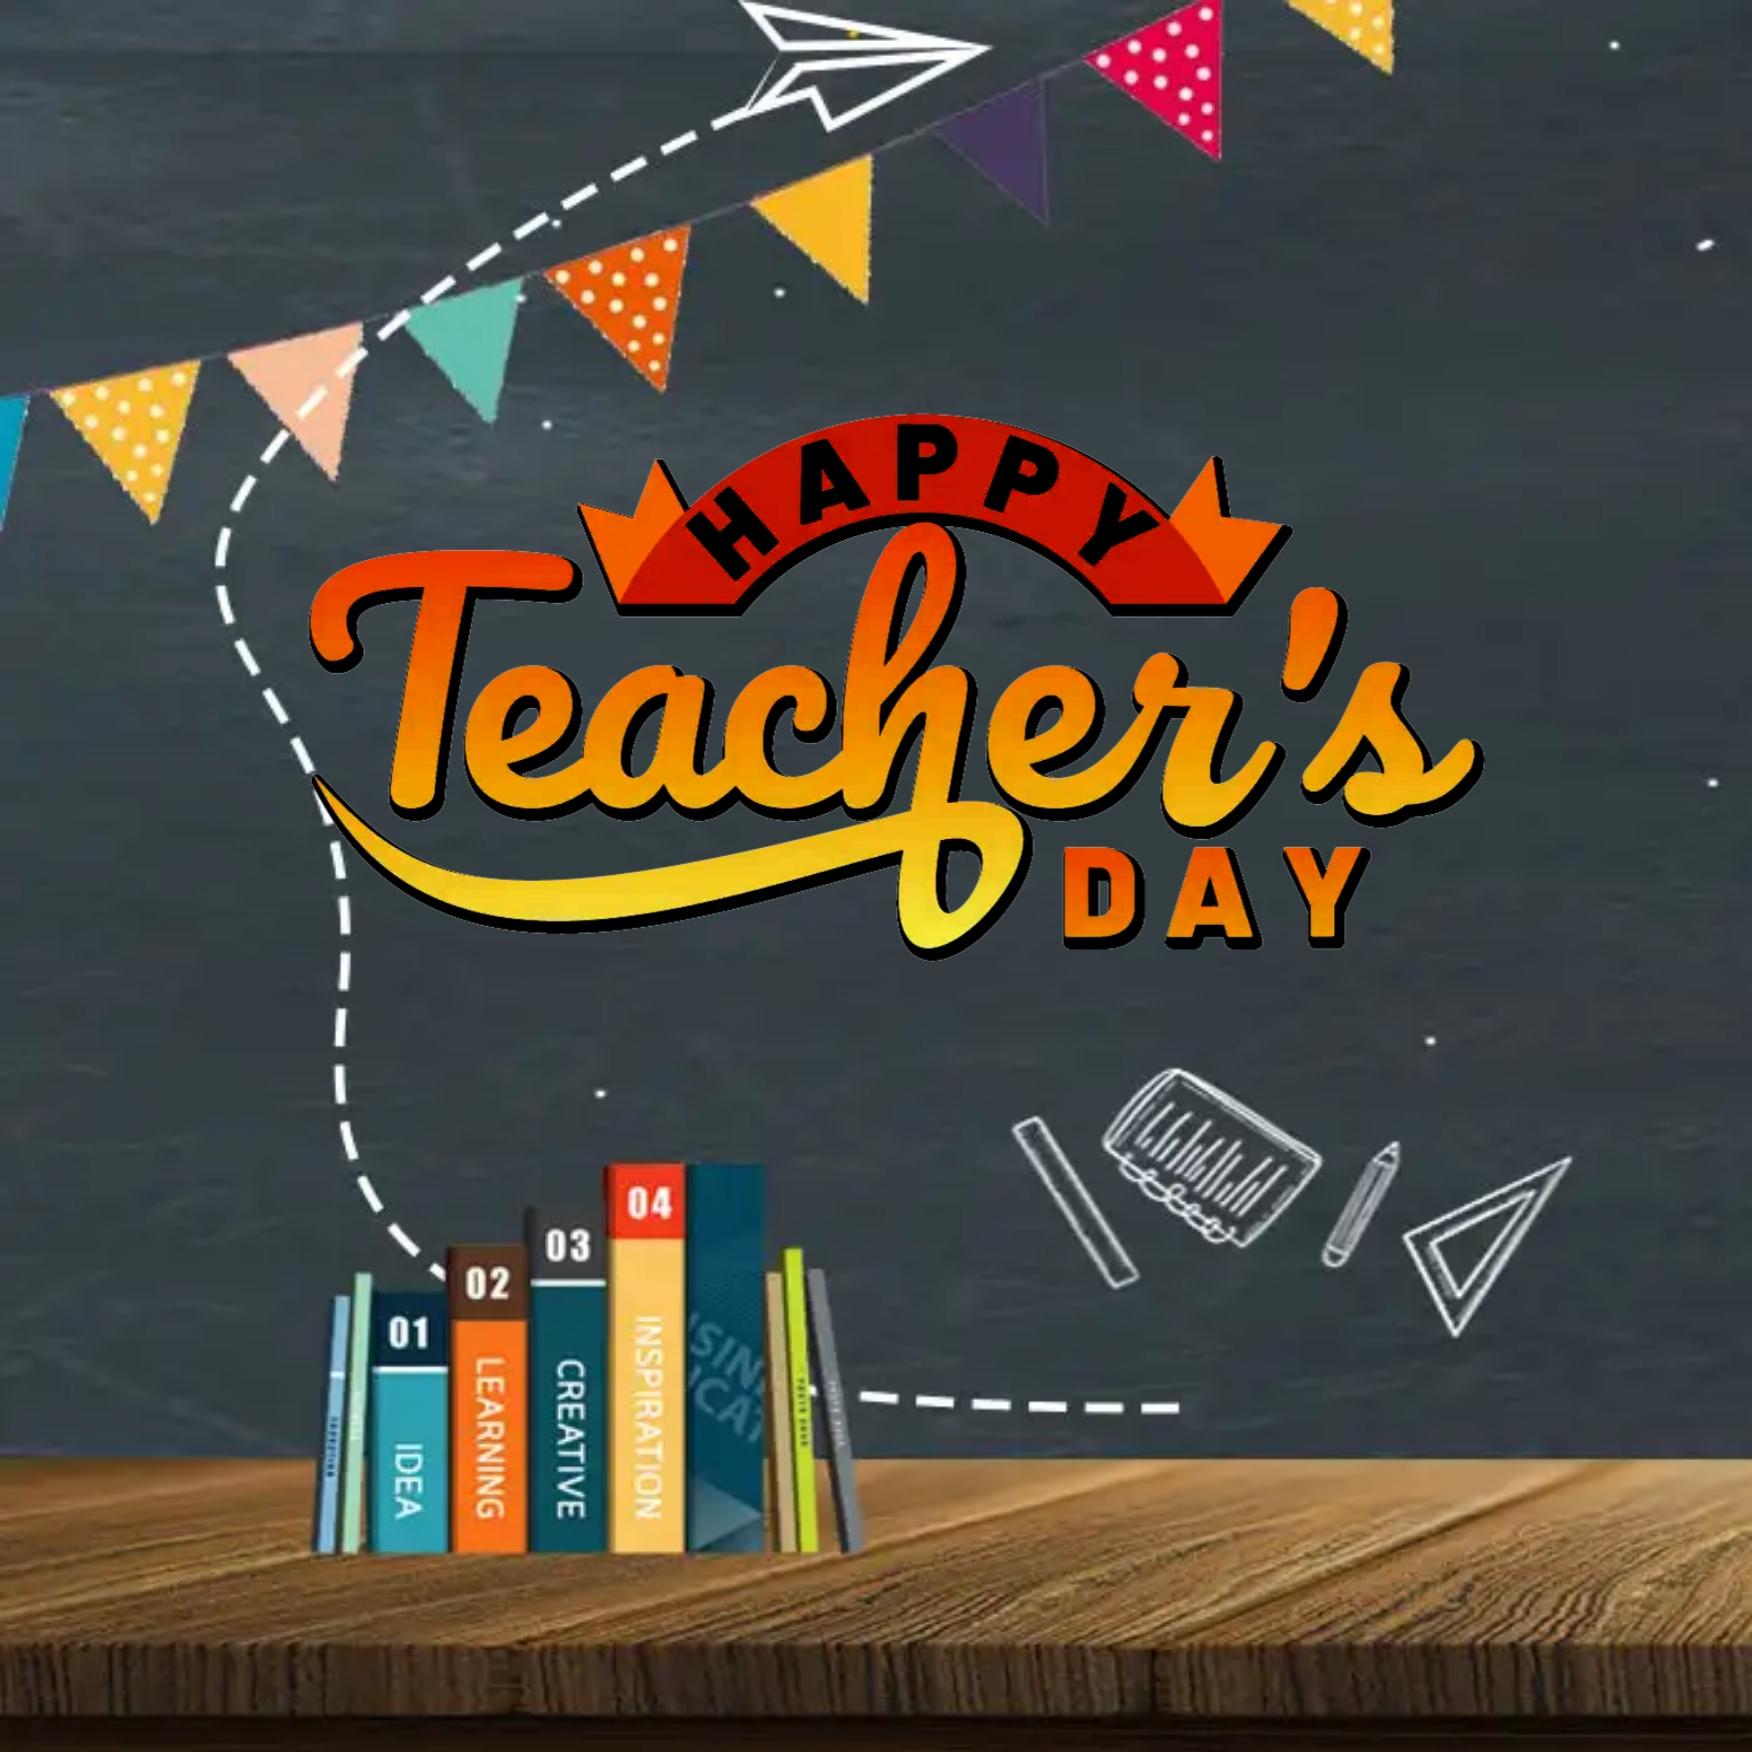 Happy Teachers Day Images for Whatsapp DP